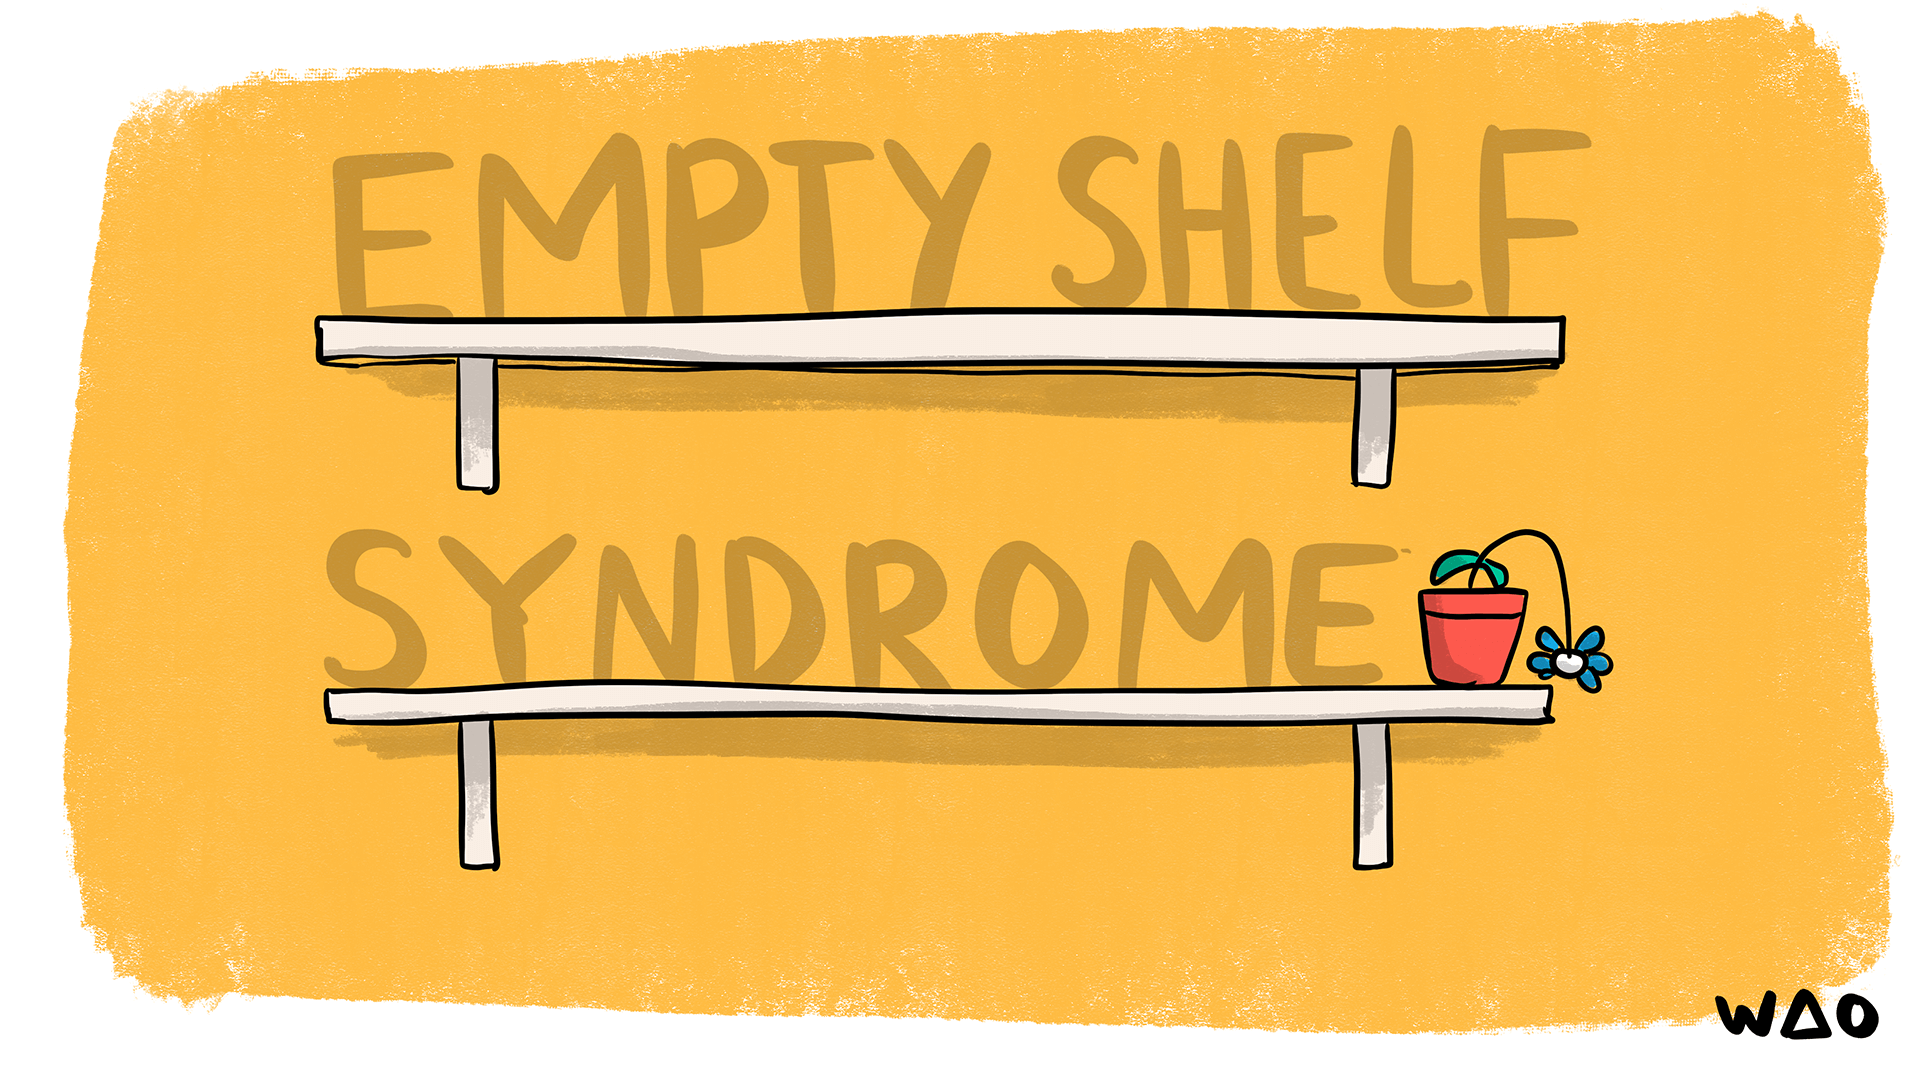 You’ve shelved all the verbs on your CV into related groups. Which of your shelves are empty? Empty Shelf Syndrome by Visual Thinkery is licensed under CC-BY-ND